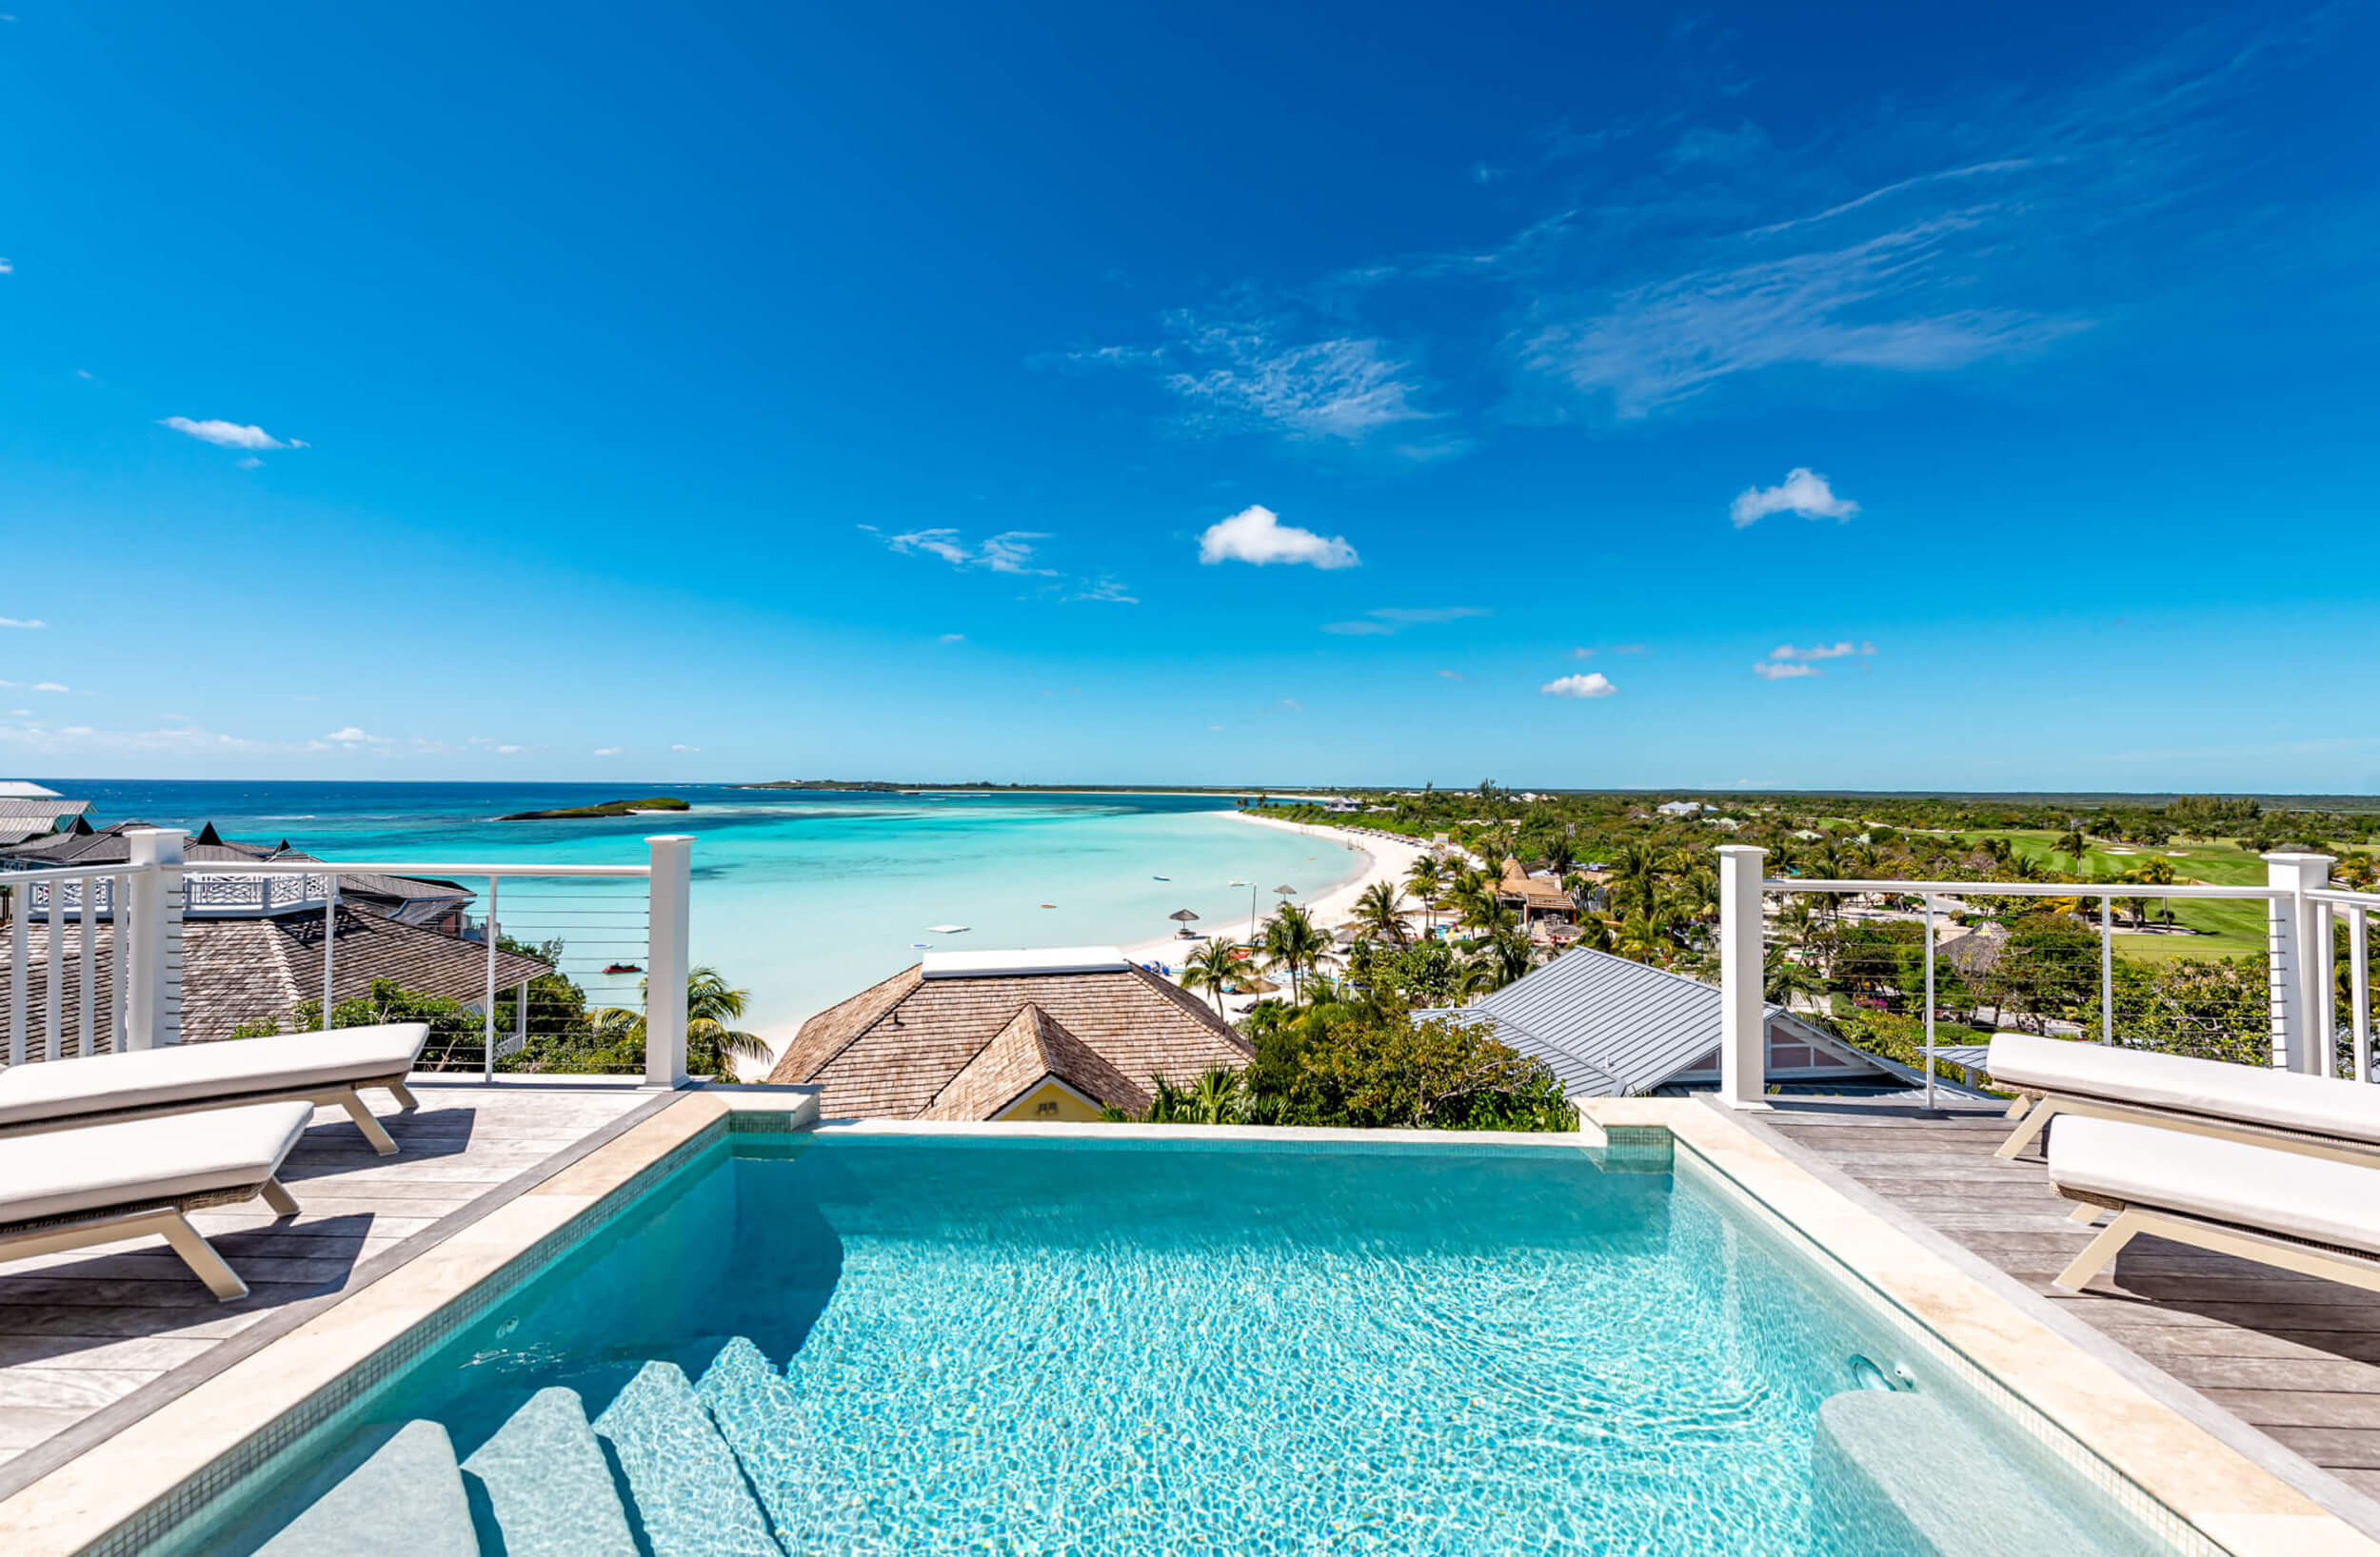 House with a pool in the Bahamas at The Abaco Club